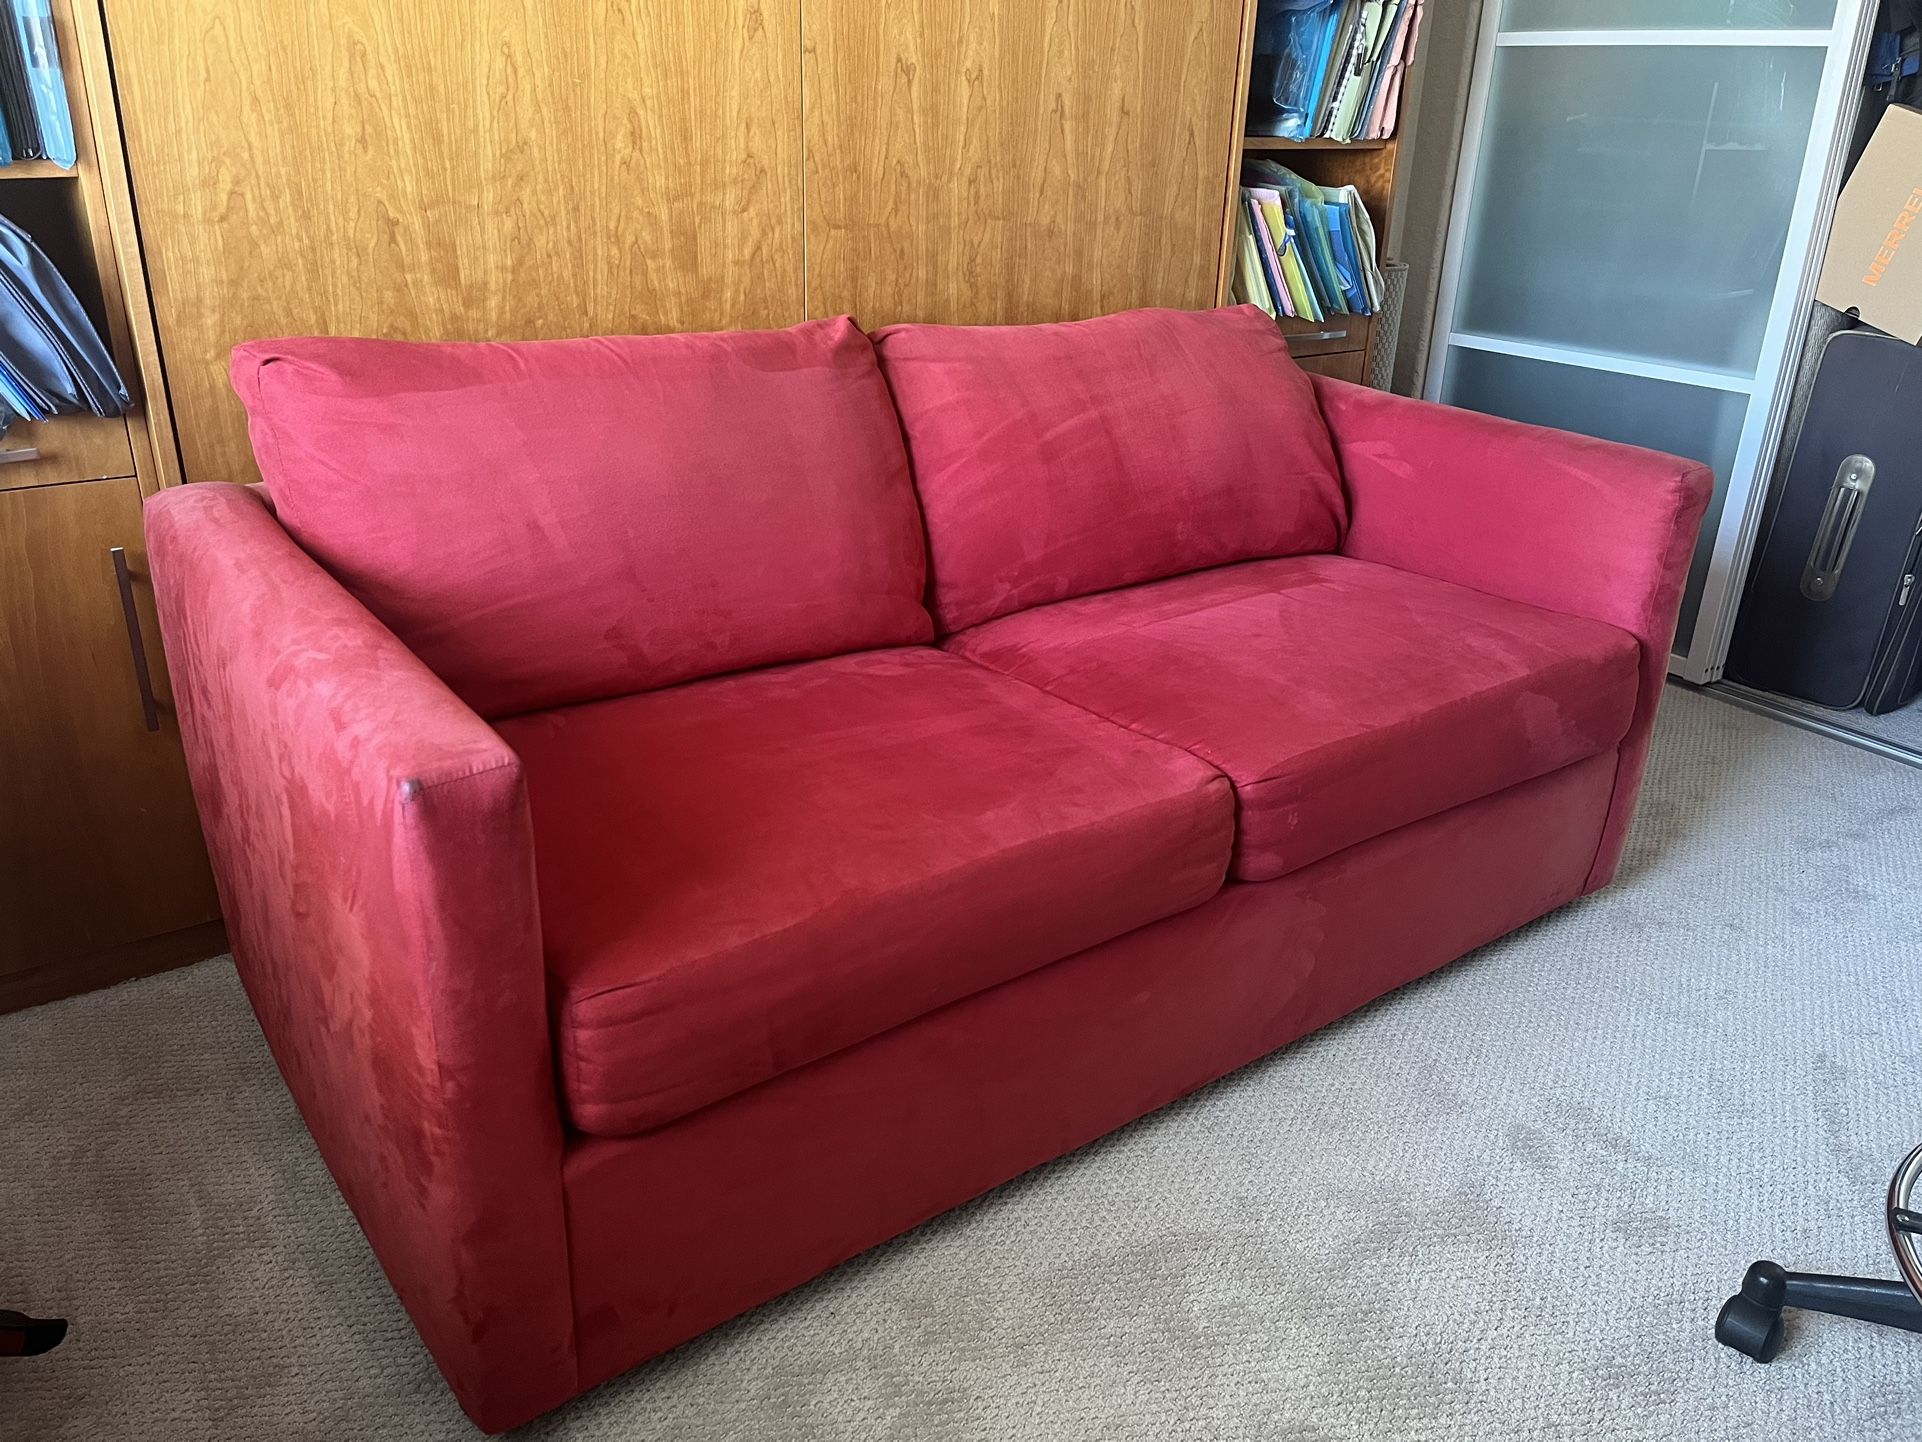 Red Sofa Bed For Sale - $100